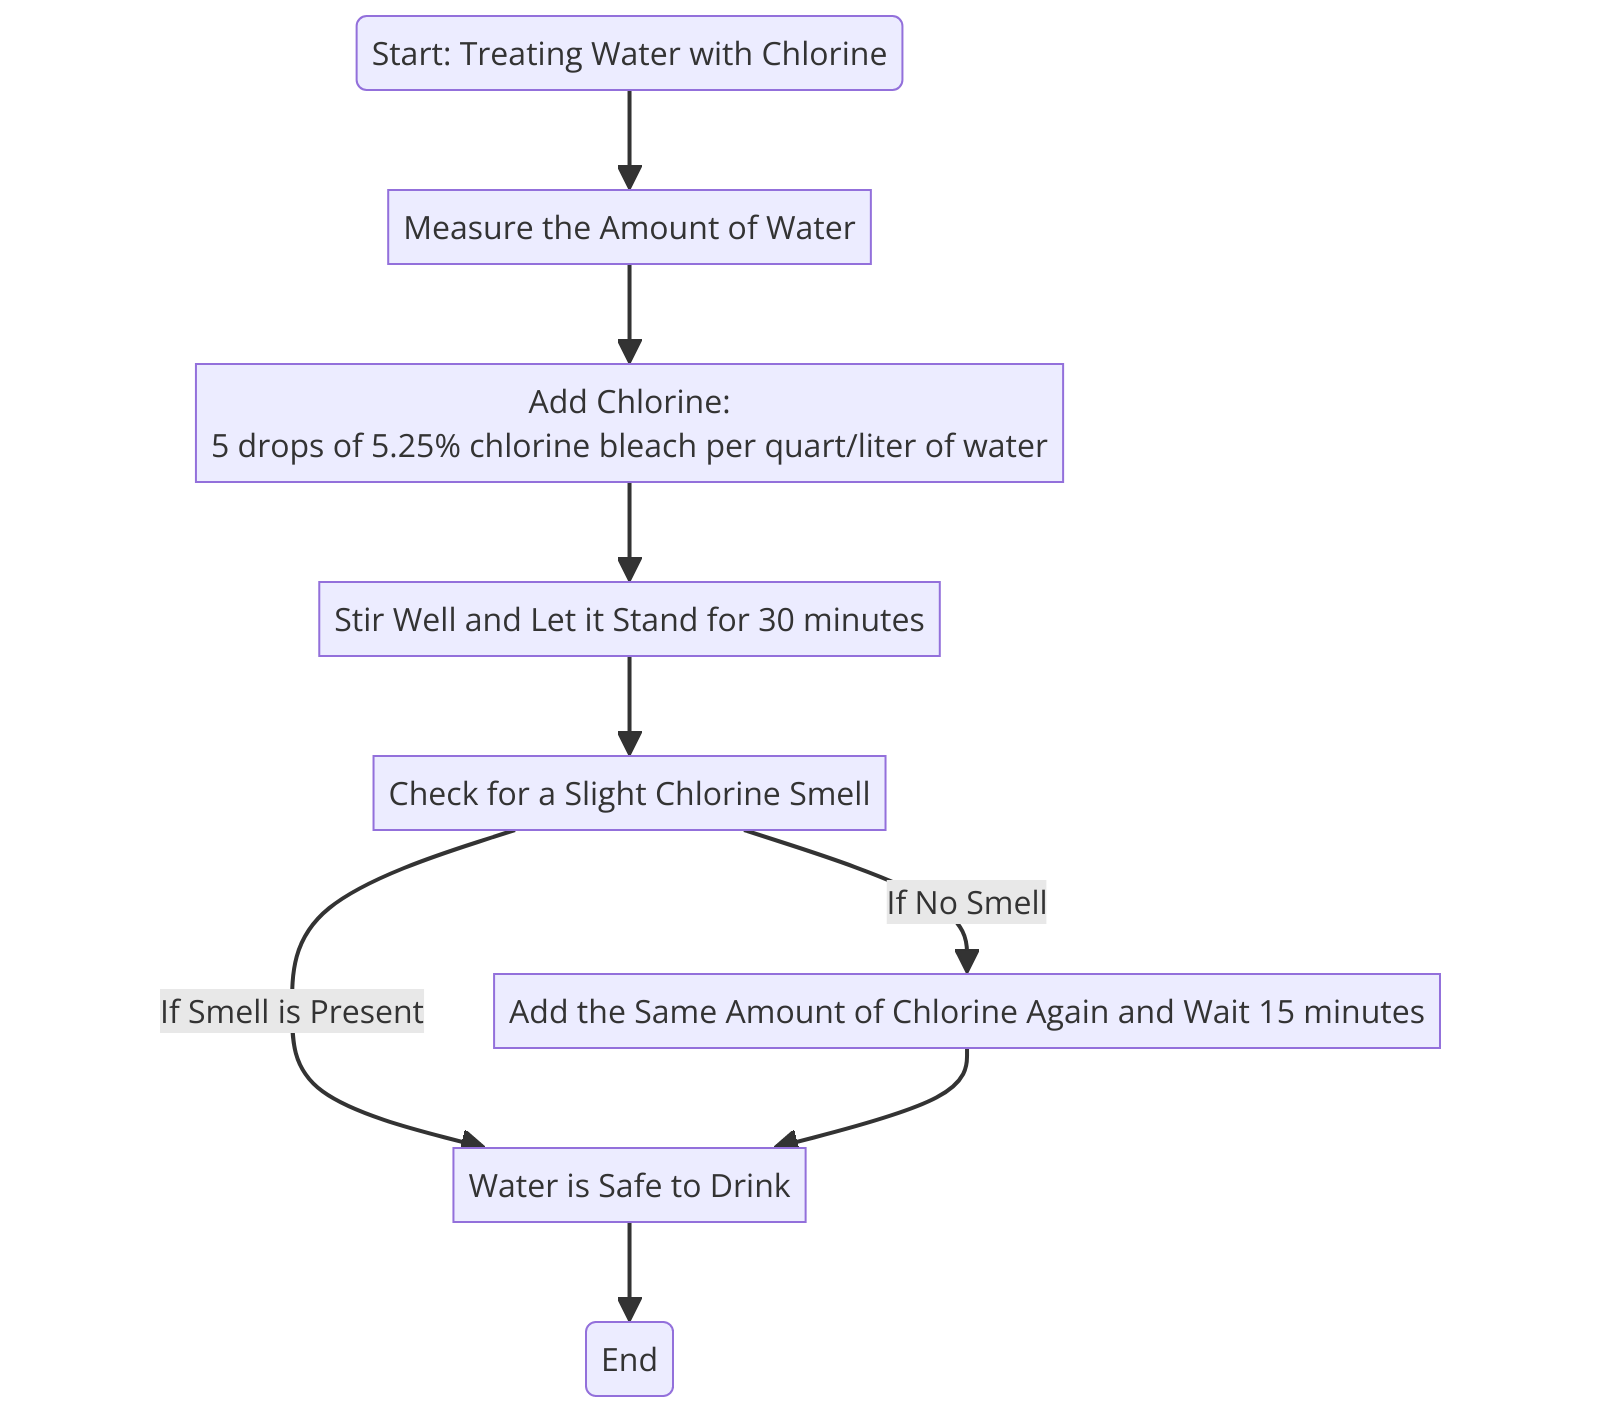 step-by-step checklist for treating water with chlorine, including the exact proportions of chlorine to water for safe consumption